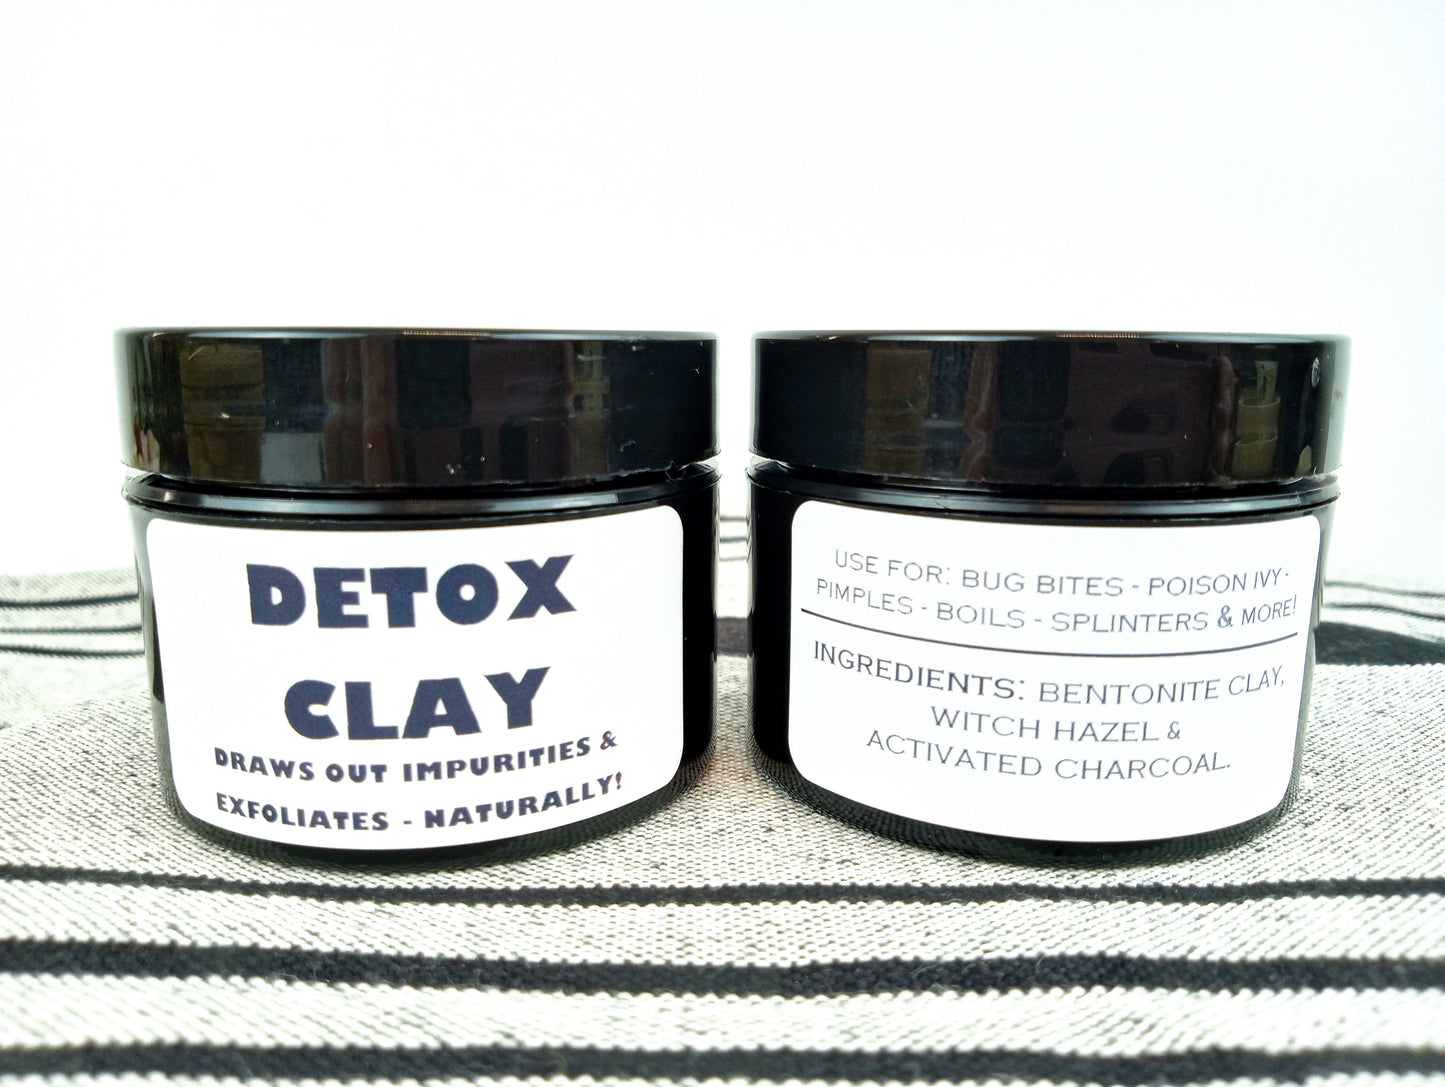 DETOX CLAY - BENTONITE CLAY WITH WITCH HAZEL - FOR: BUG BITES - POISON IVY // RASHES & MORE 2 oz.